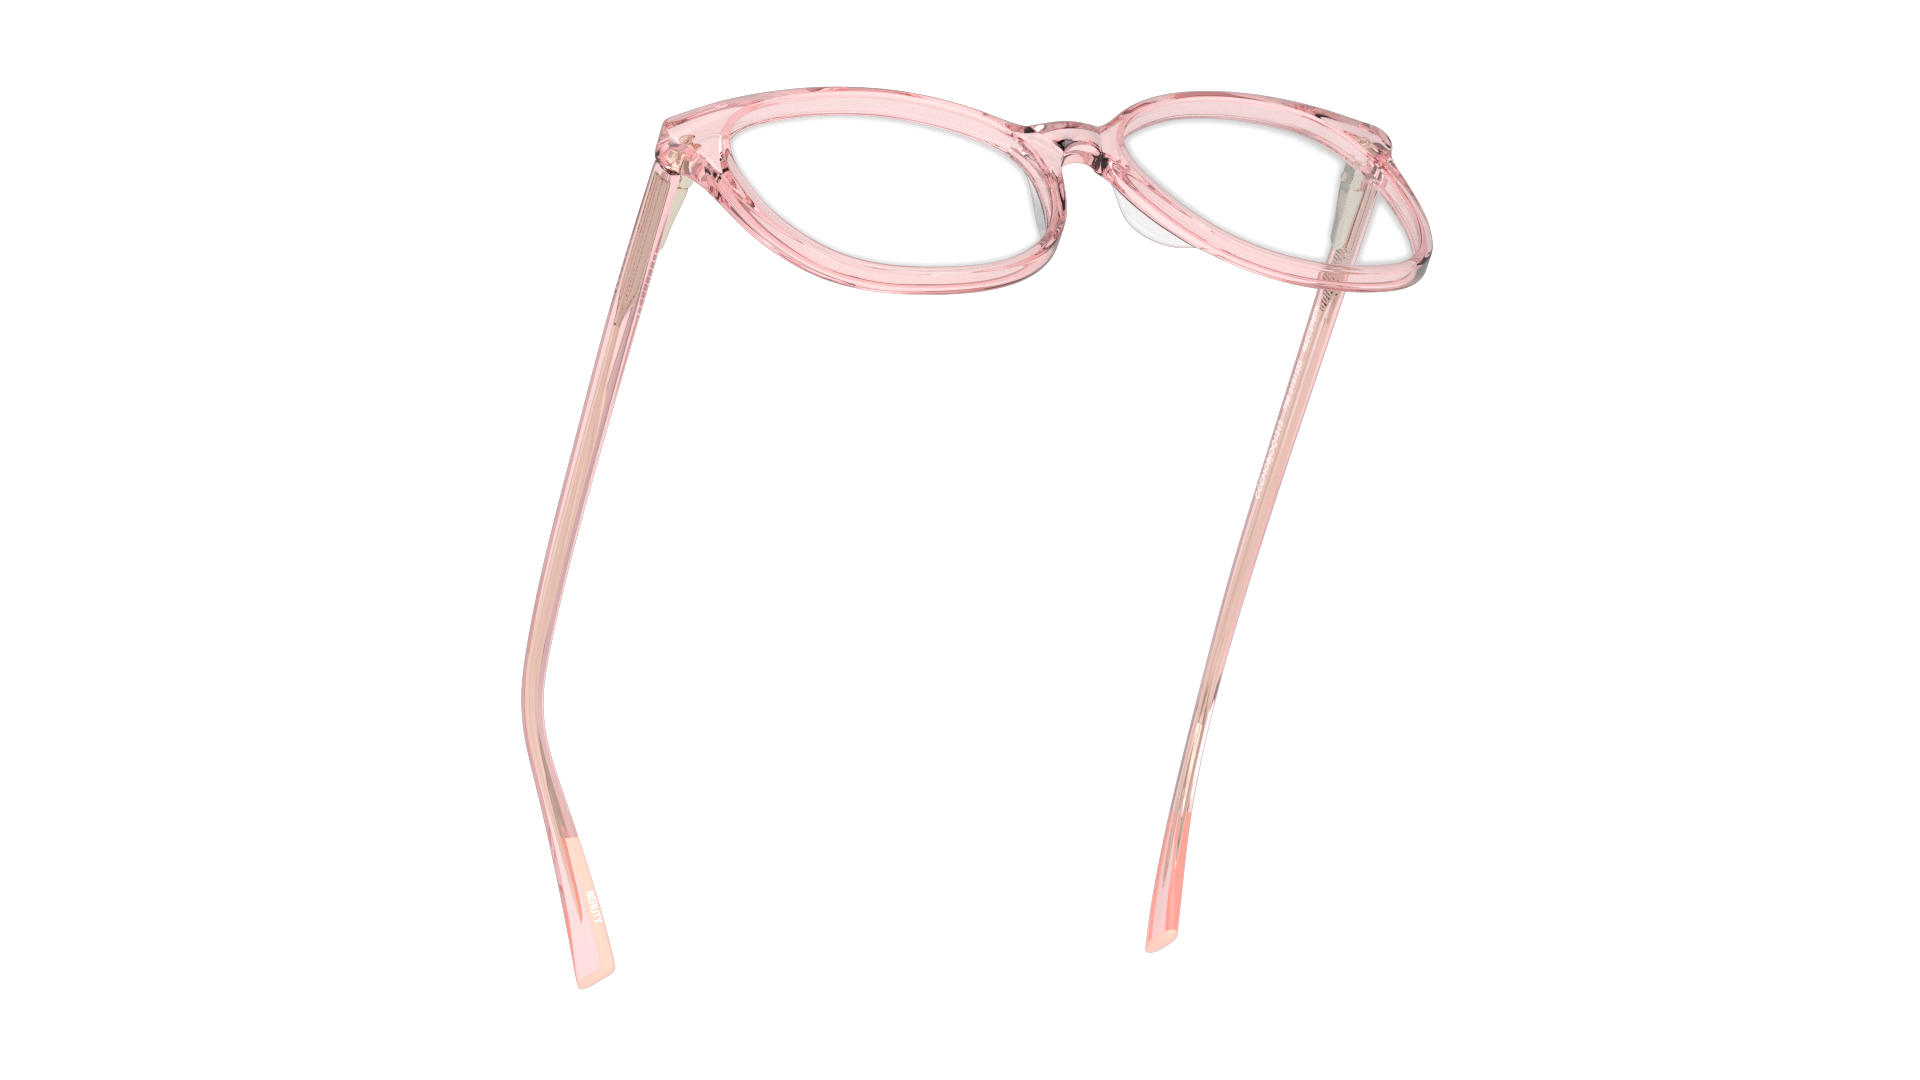 Bottom_Up Unofficial UNOF0002 (PX00) Glasses Transparent / Pink